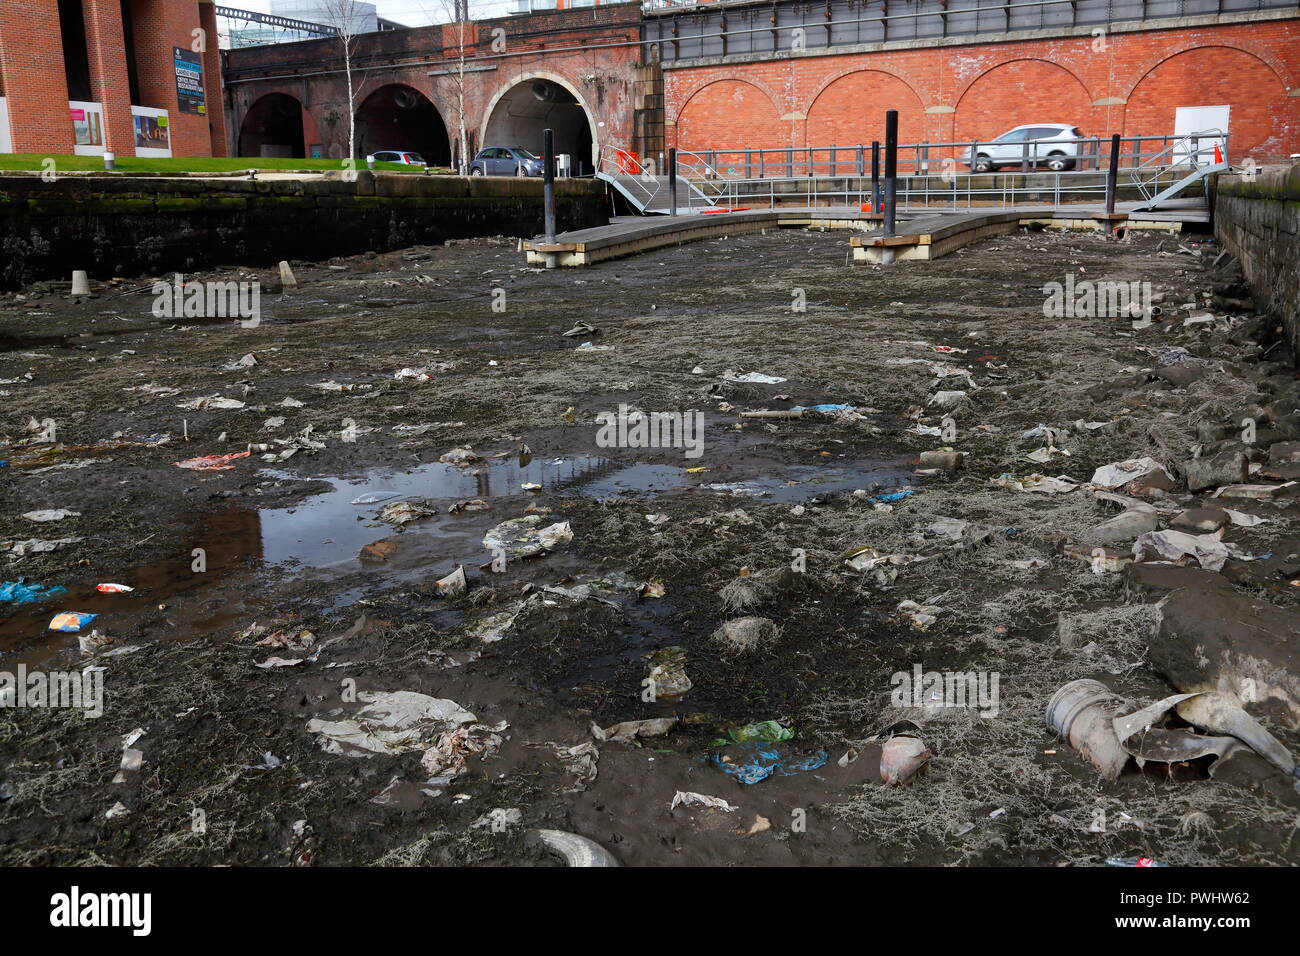 The Leeds to Liverpool Canal in Leeds which was drained to allow work to be carried out to one of the Locks at Granary Wharf in Leeds City Centre. Stock Photo